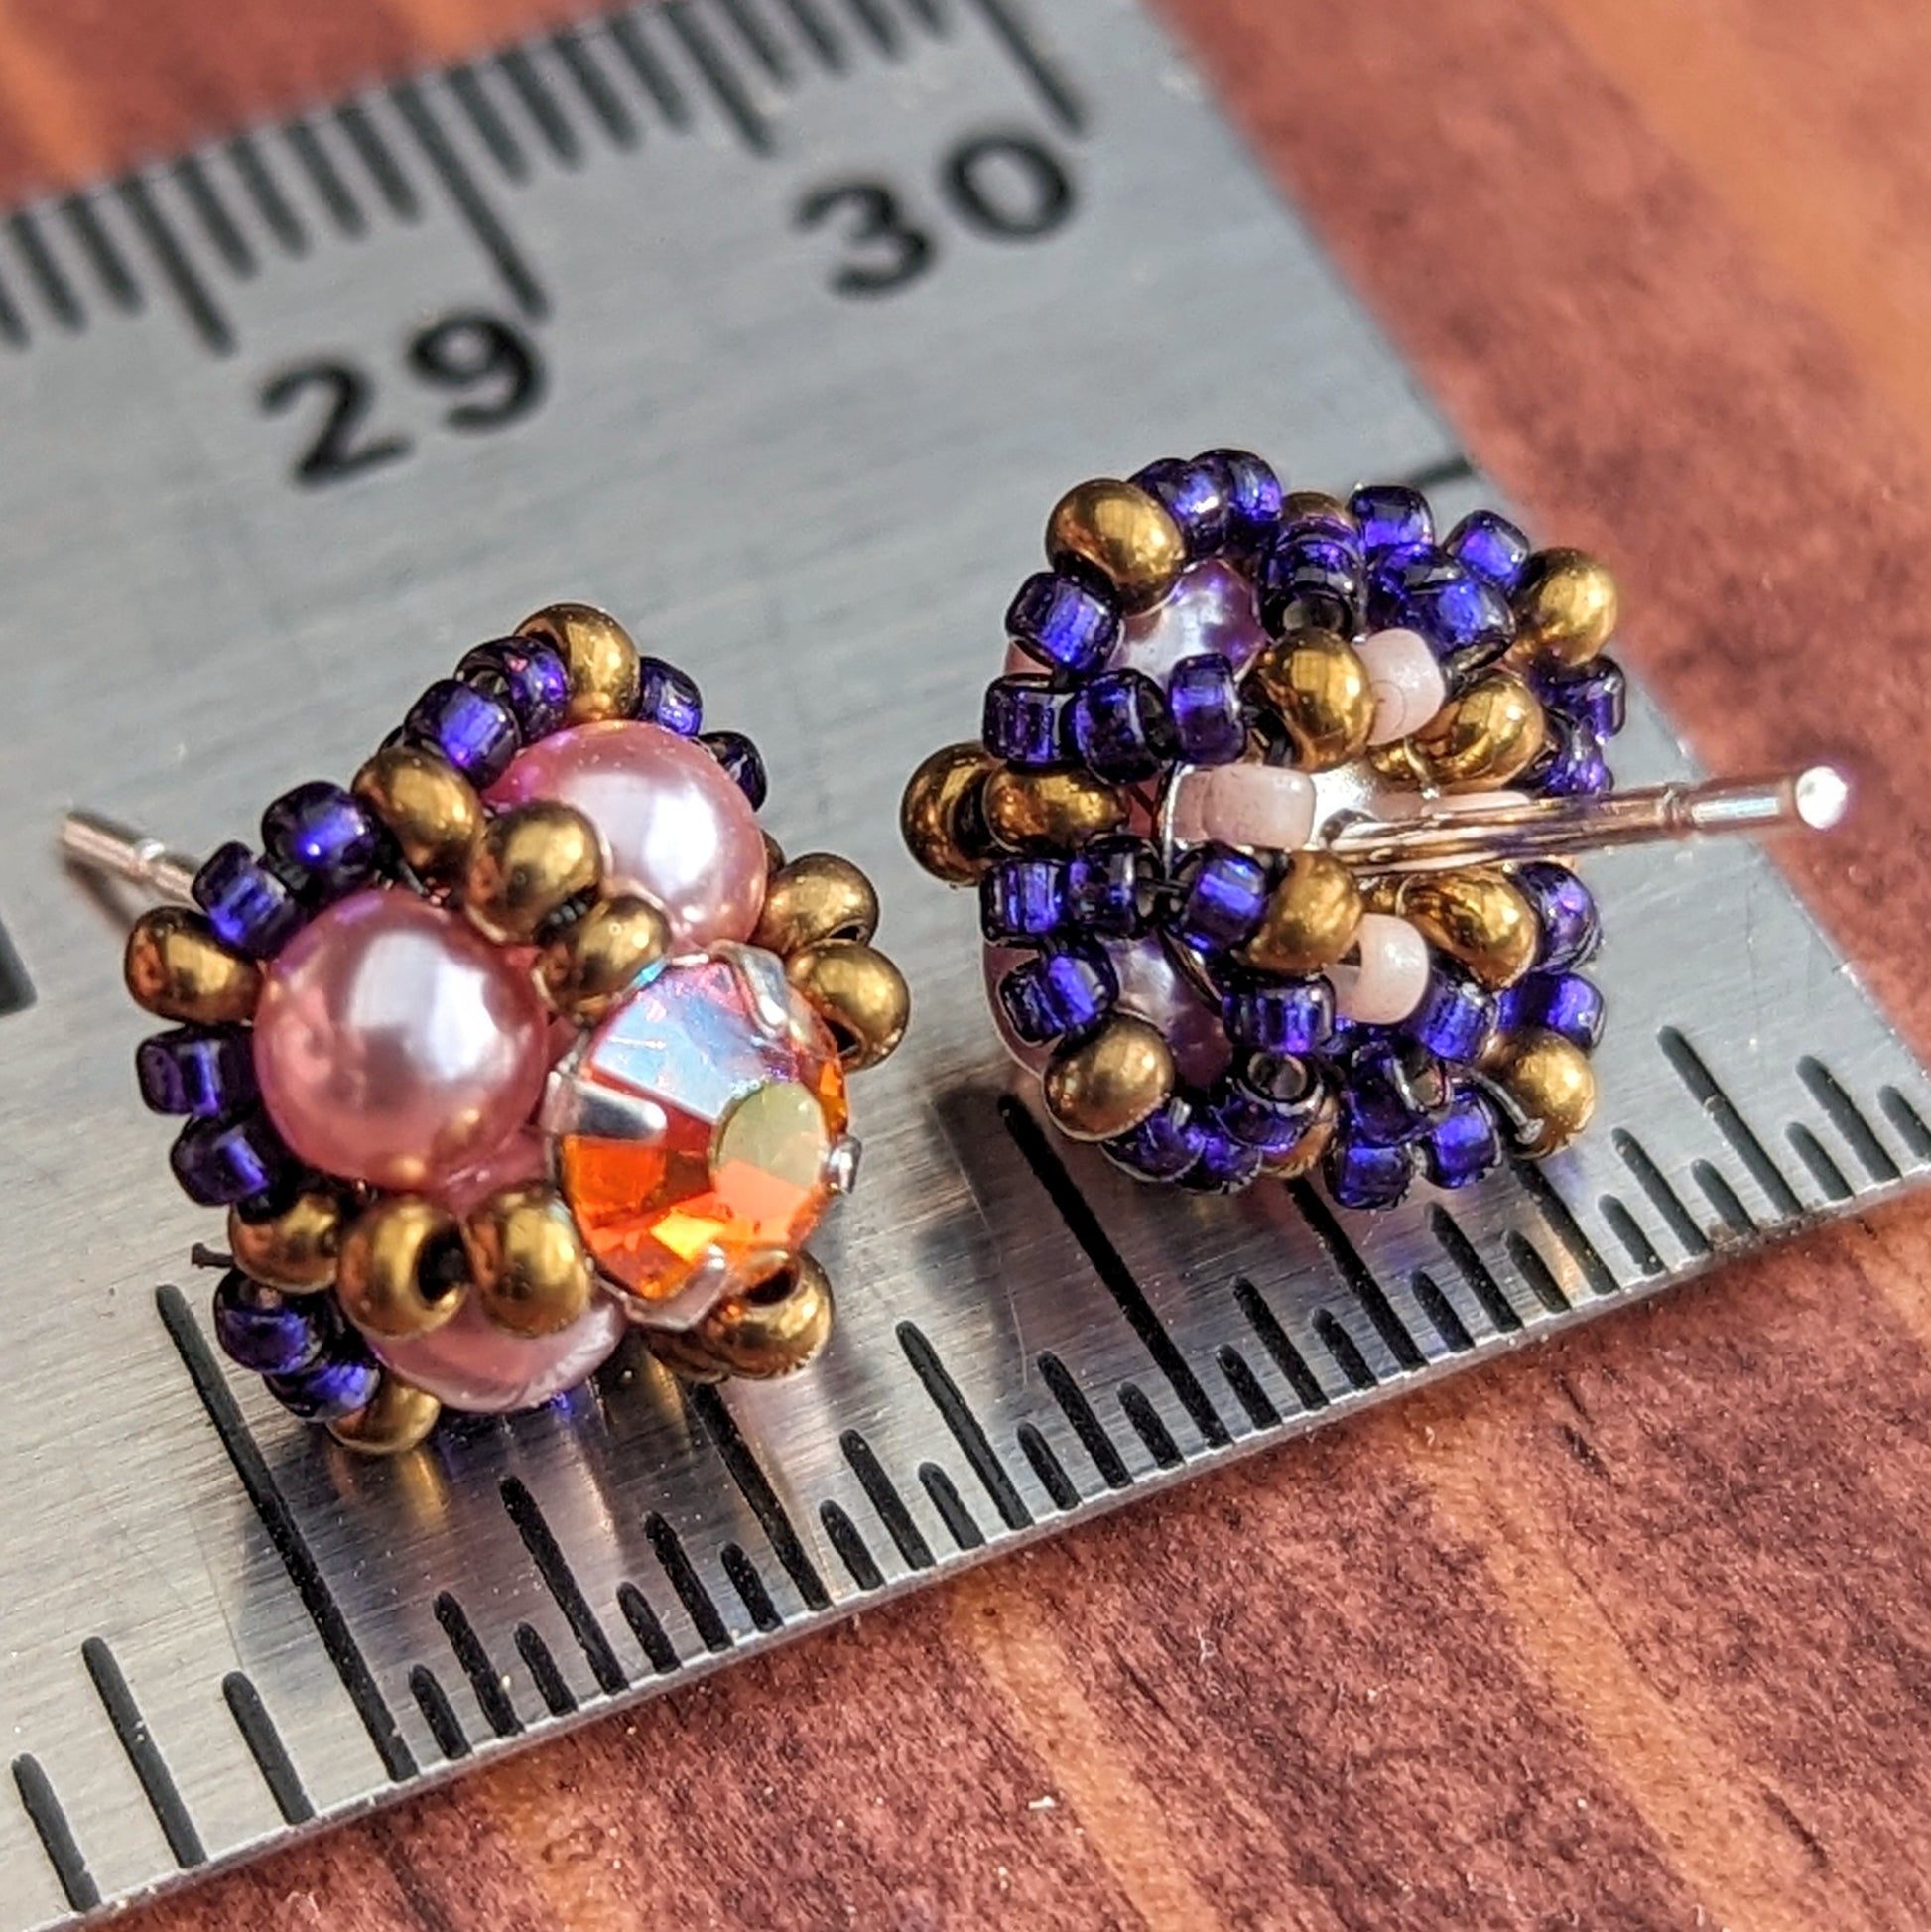 Square stud earrings resting on a metal ruler to show that they are a little less than a half inch across. The studs are placed with one cacing forwards and one showing the back, which has a net of small beads holding the finding in place. The forward facing earring is formed from pearly pale pink beads with a golden-orange and rainbow flash rhinestone. The rhinestone is held in place by an x-shape of antique gold seed beads. The outside of the earrings is outlined in dark electric purple seed beads. 